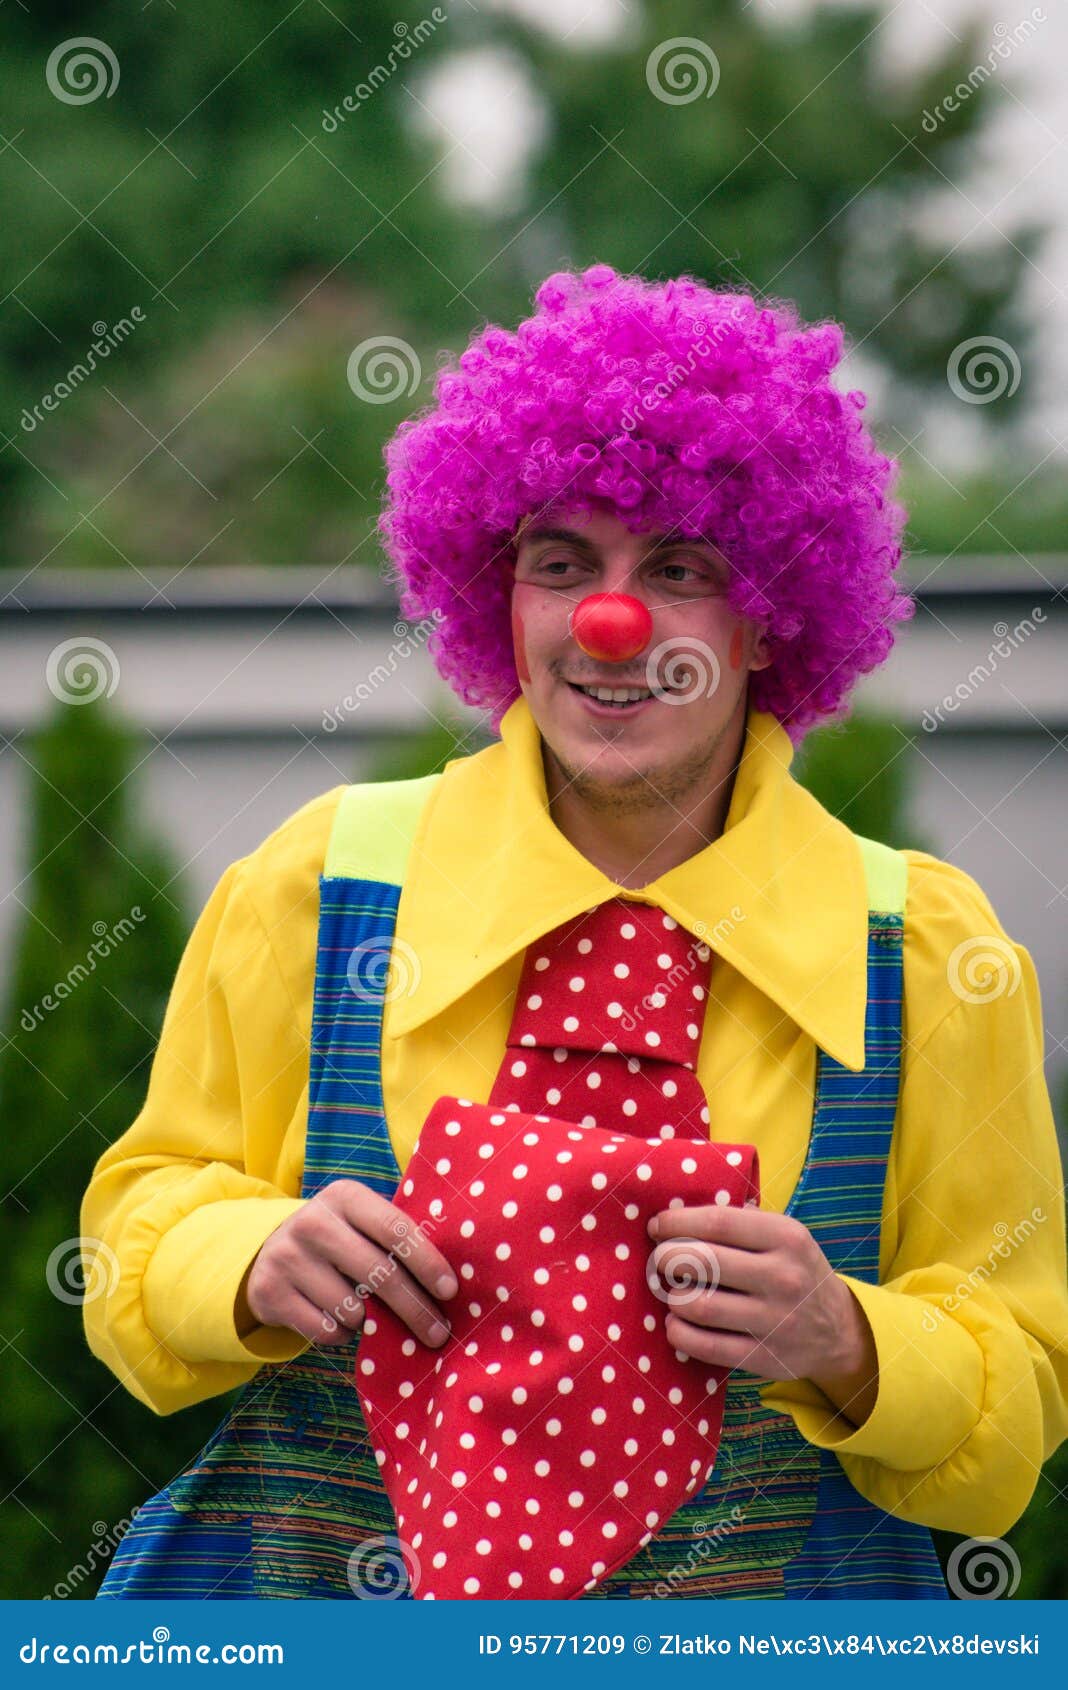 Happy Clown With Big Red Tie Stock Image - Image of buffoon, background The Clown Wore A Wide Tie And A Floppy Hat